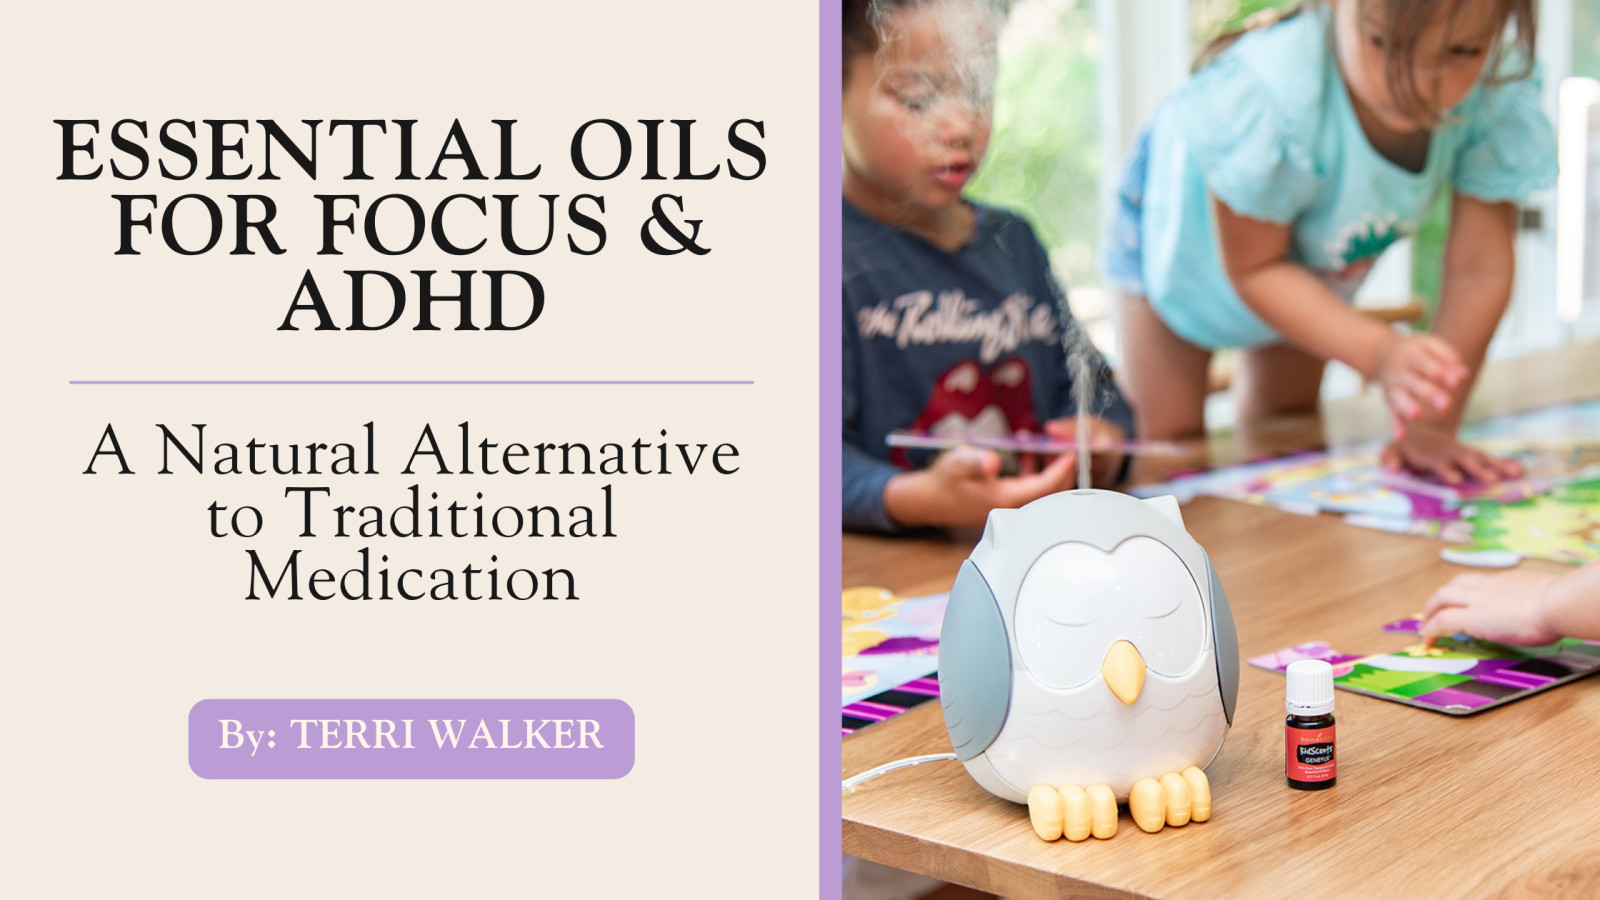 Essential Oils for Focus and ADHD